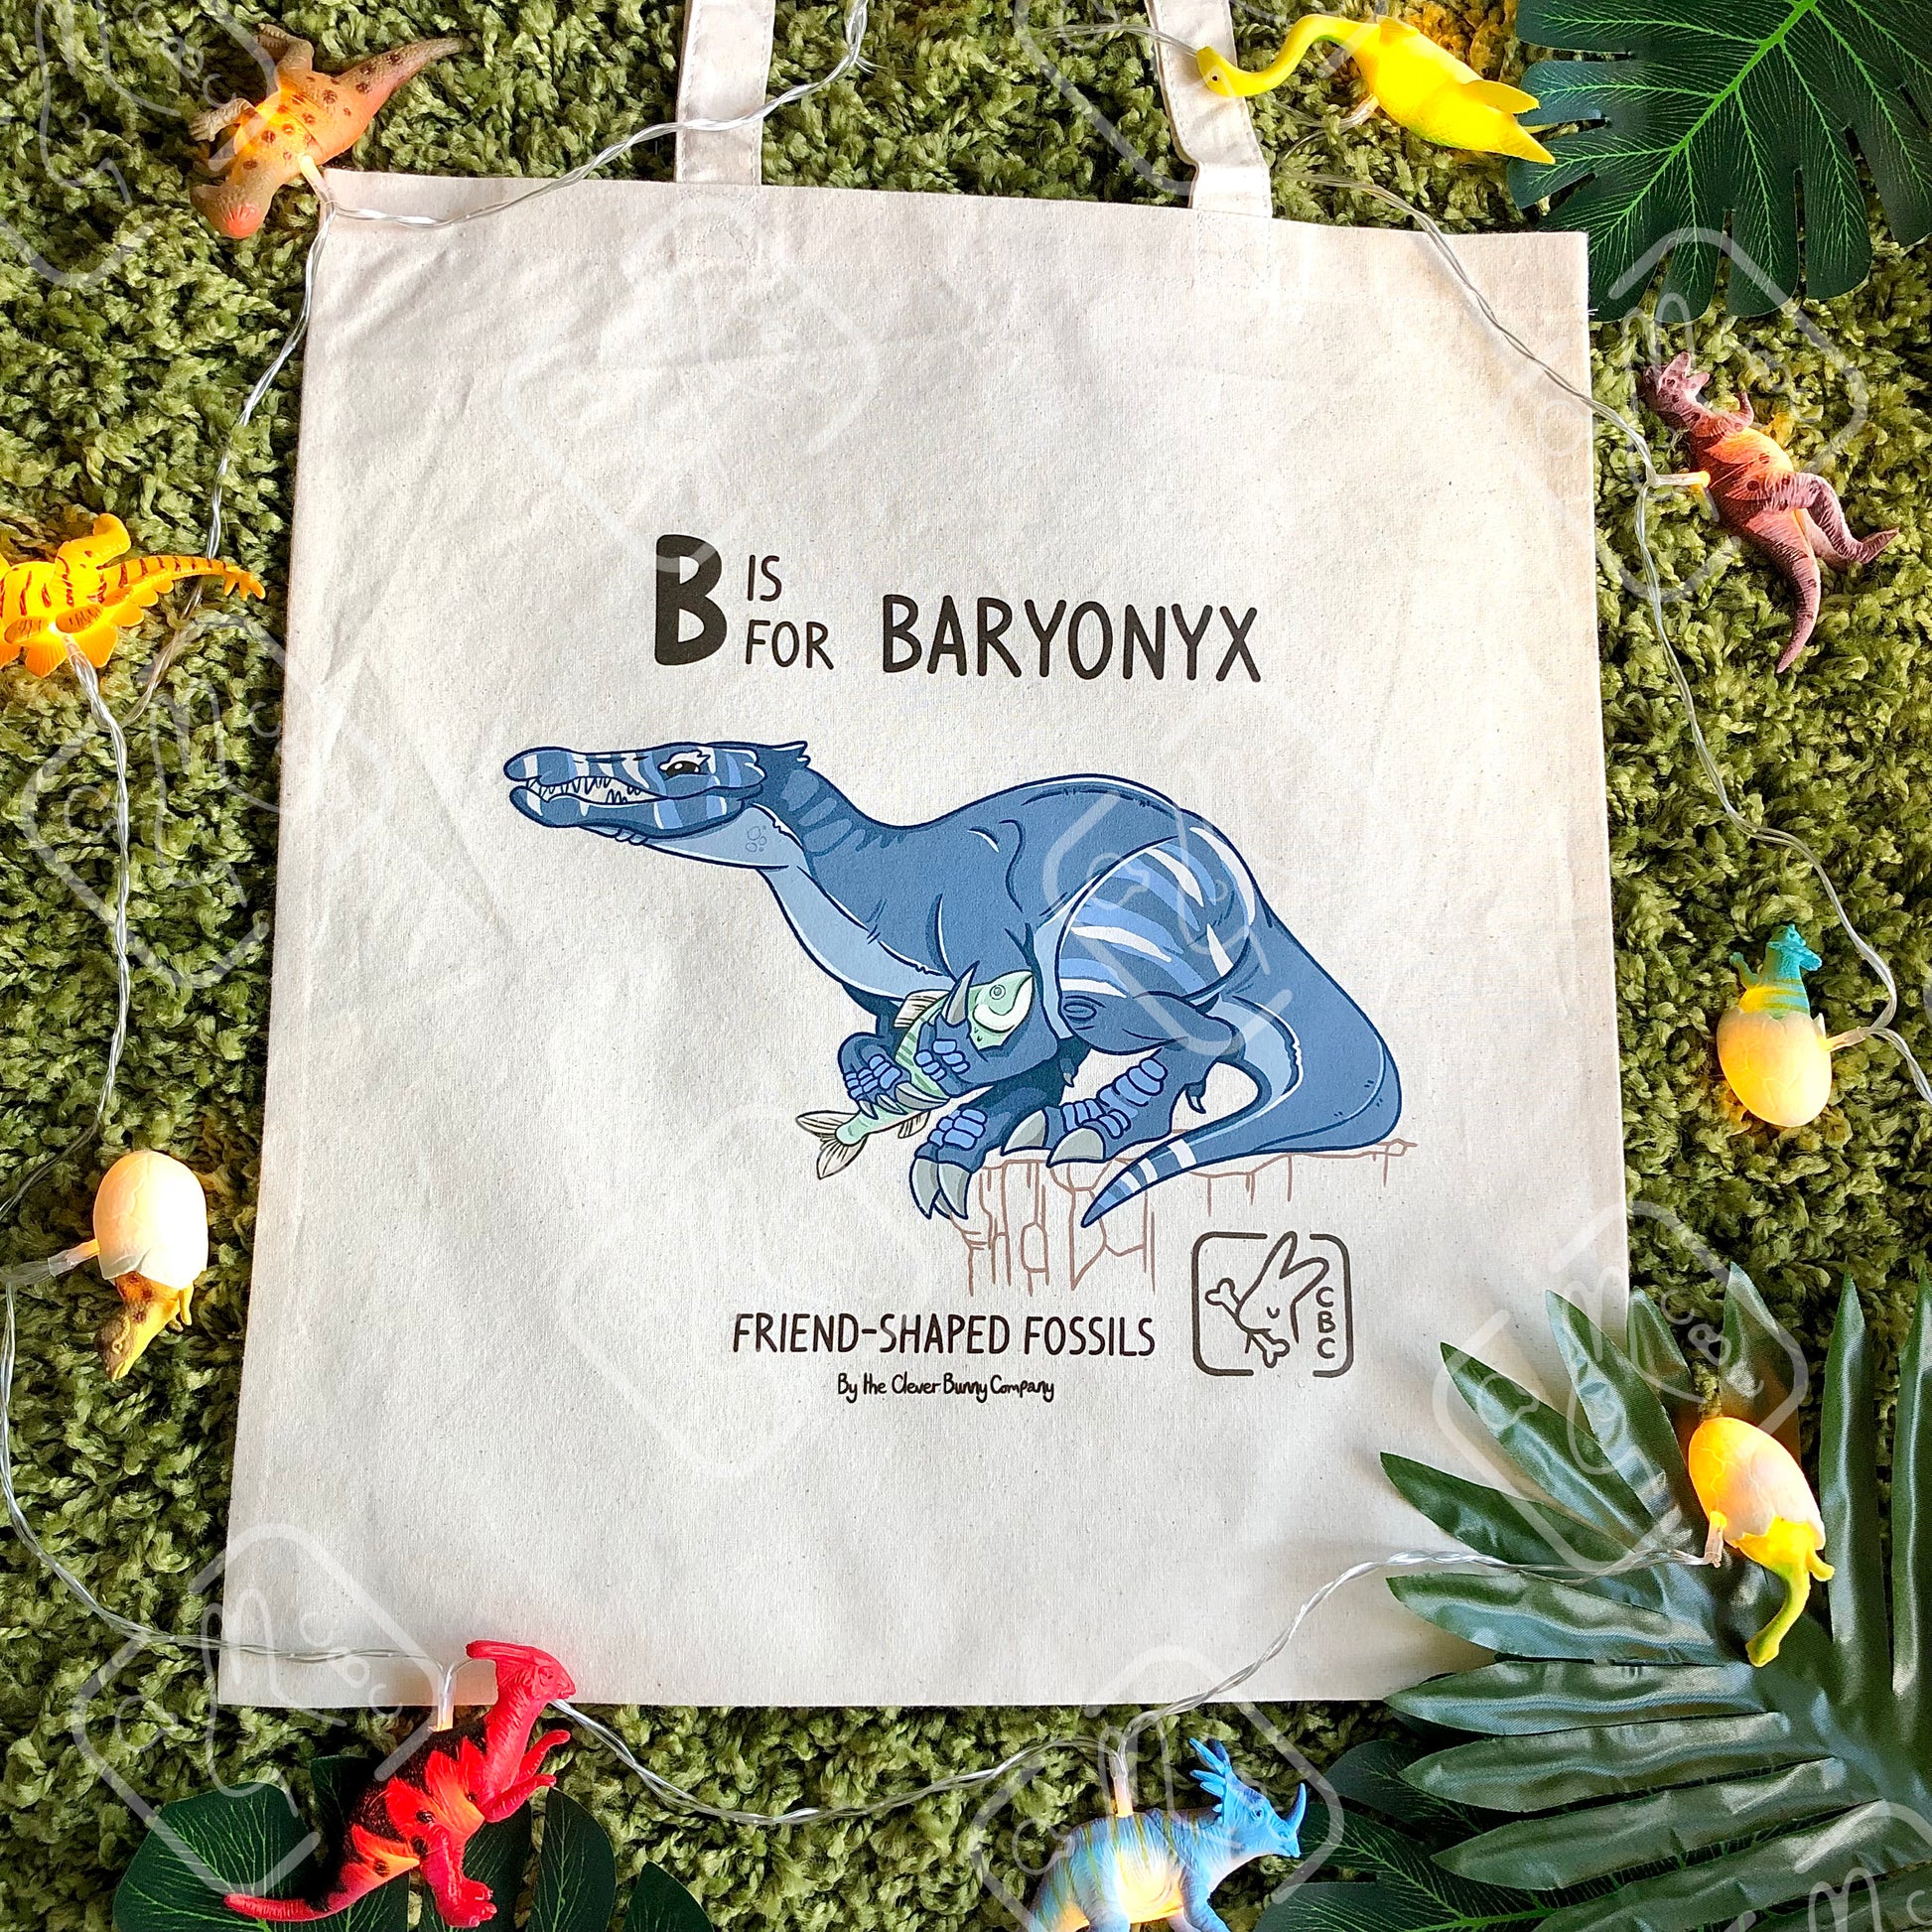 A tote bag featuring a blue baryonyx dinosaur holding a fish. Text reads "B is for Baryonyx" and "Friend-shaped Fossils by the Clever Bunny Company."